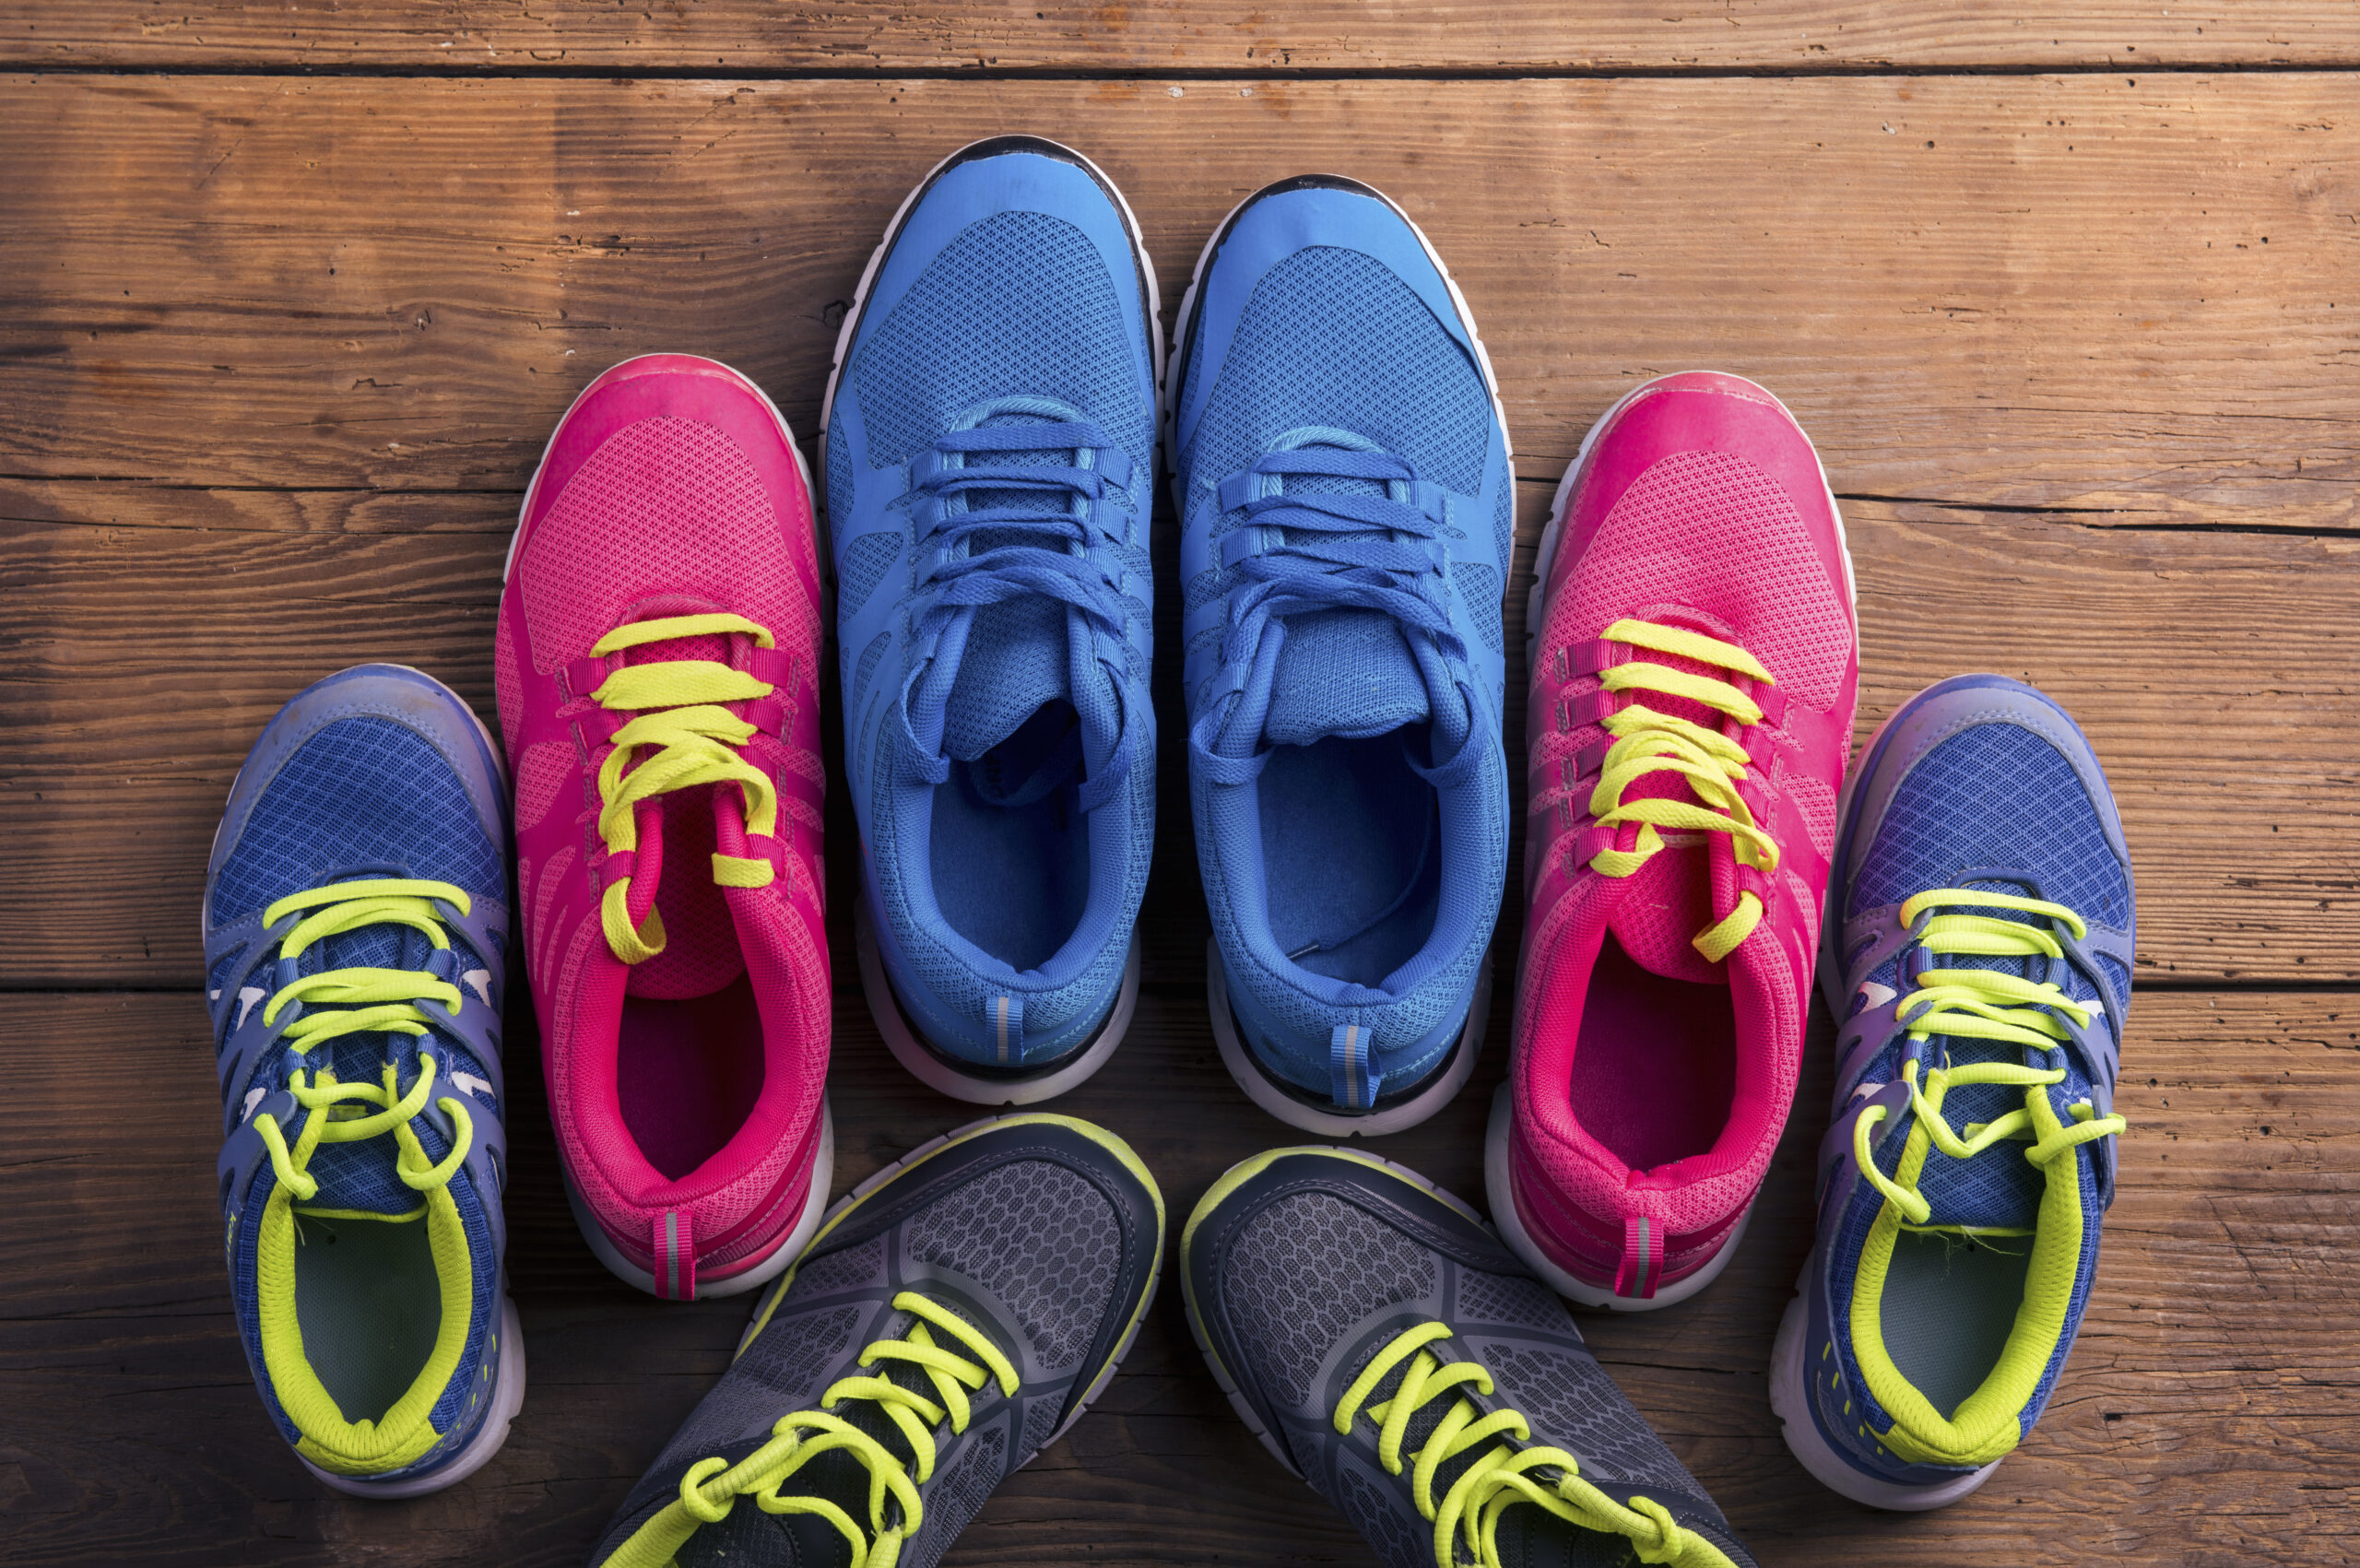 Looking for colorful running shoes for purchasing? Check out these vibrant kicks on a wooden floor.